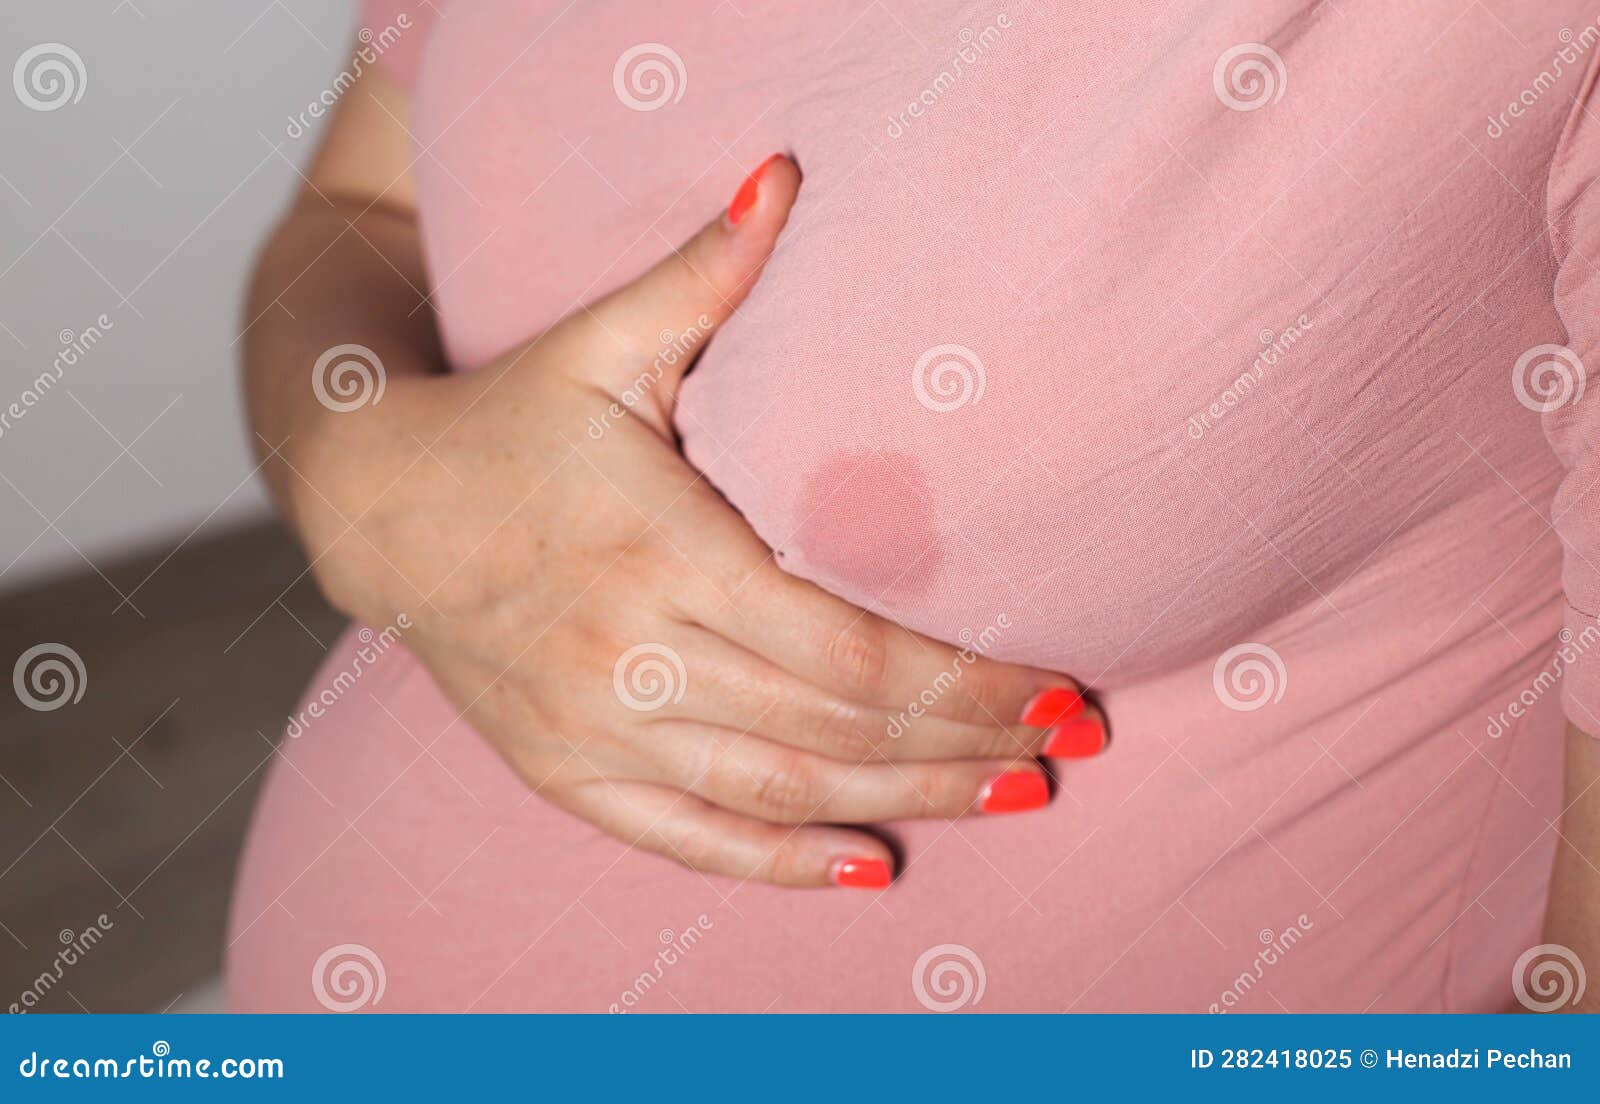 A Soaked Blouse from Milk on the Female Breast of a Nursing Mother. Leak-proof  Bra Pads, Close-up Stock Image - Image of gestation, period: 282418025